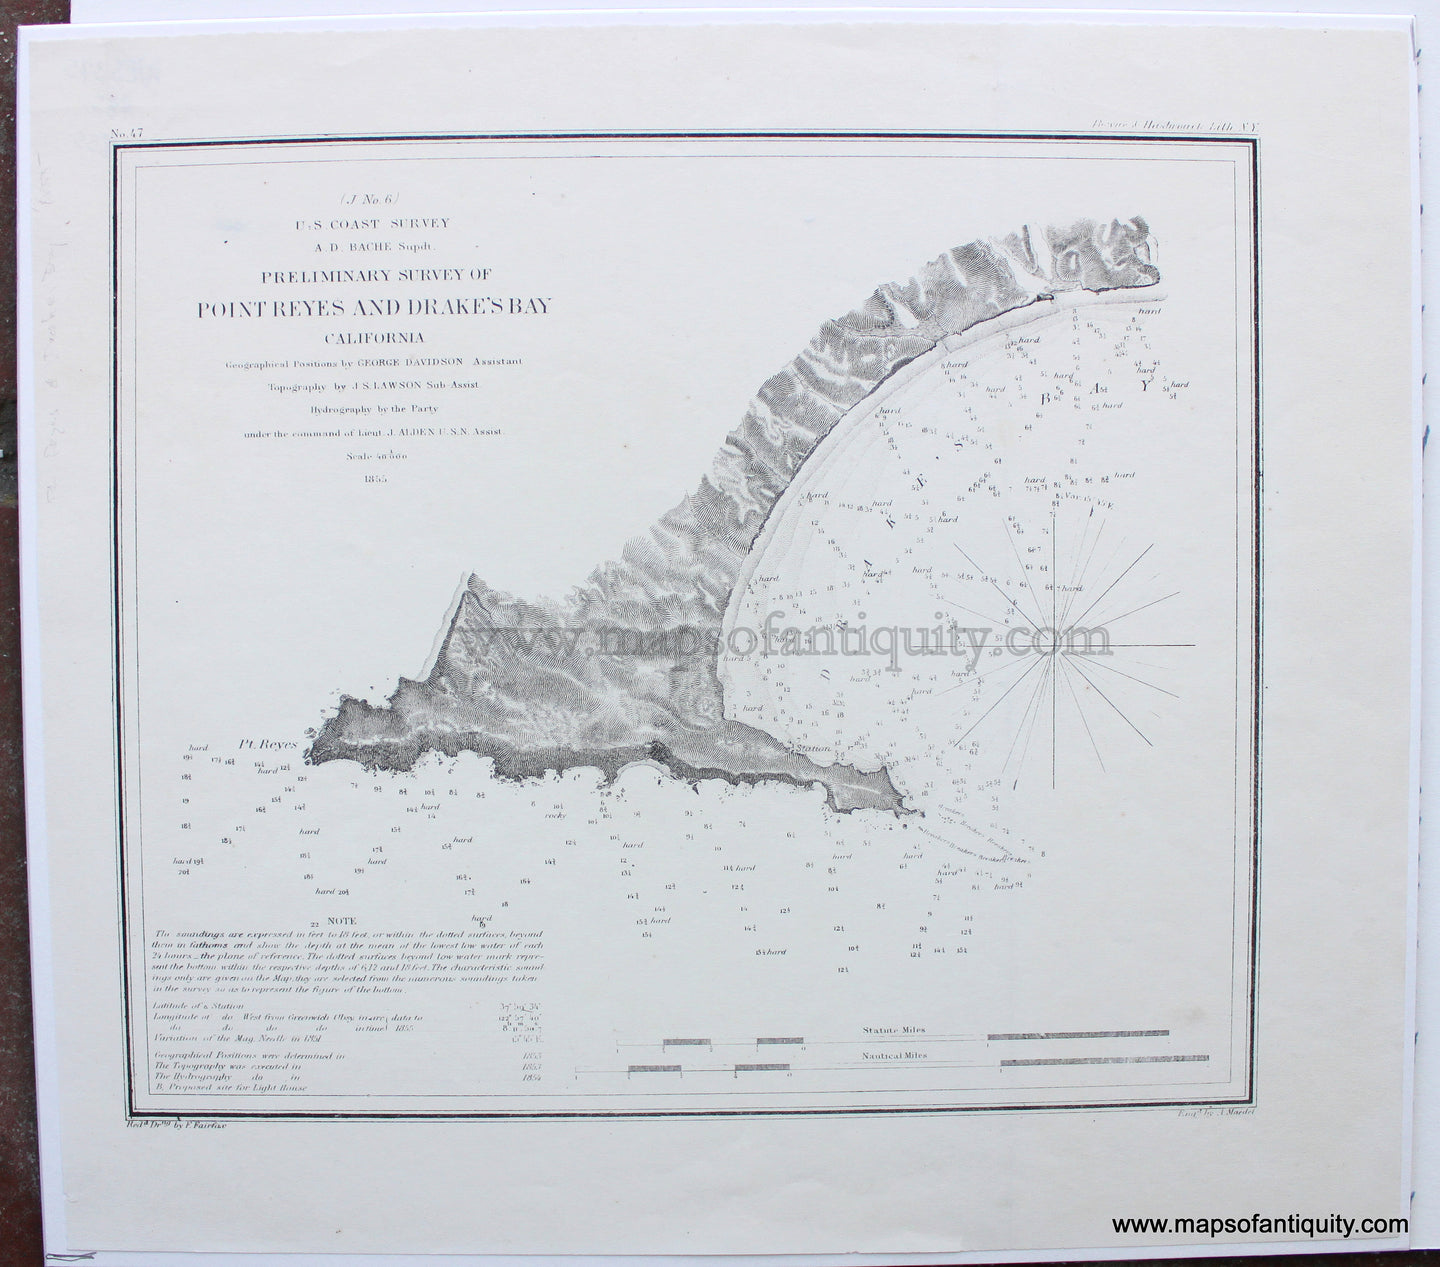 Antique-Uncolored-Coast-Chart-Preliminary-Survey-of-Point-Reyes-and-Drake's-Bay,-California-1855-USCS-West-California-1800s-19th-century-Maps-of-Antiquity